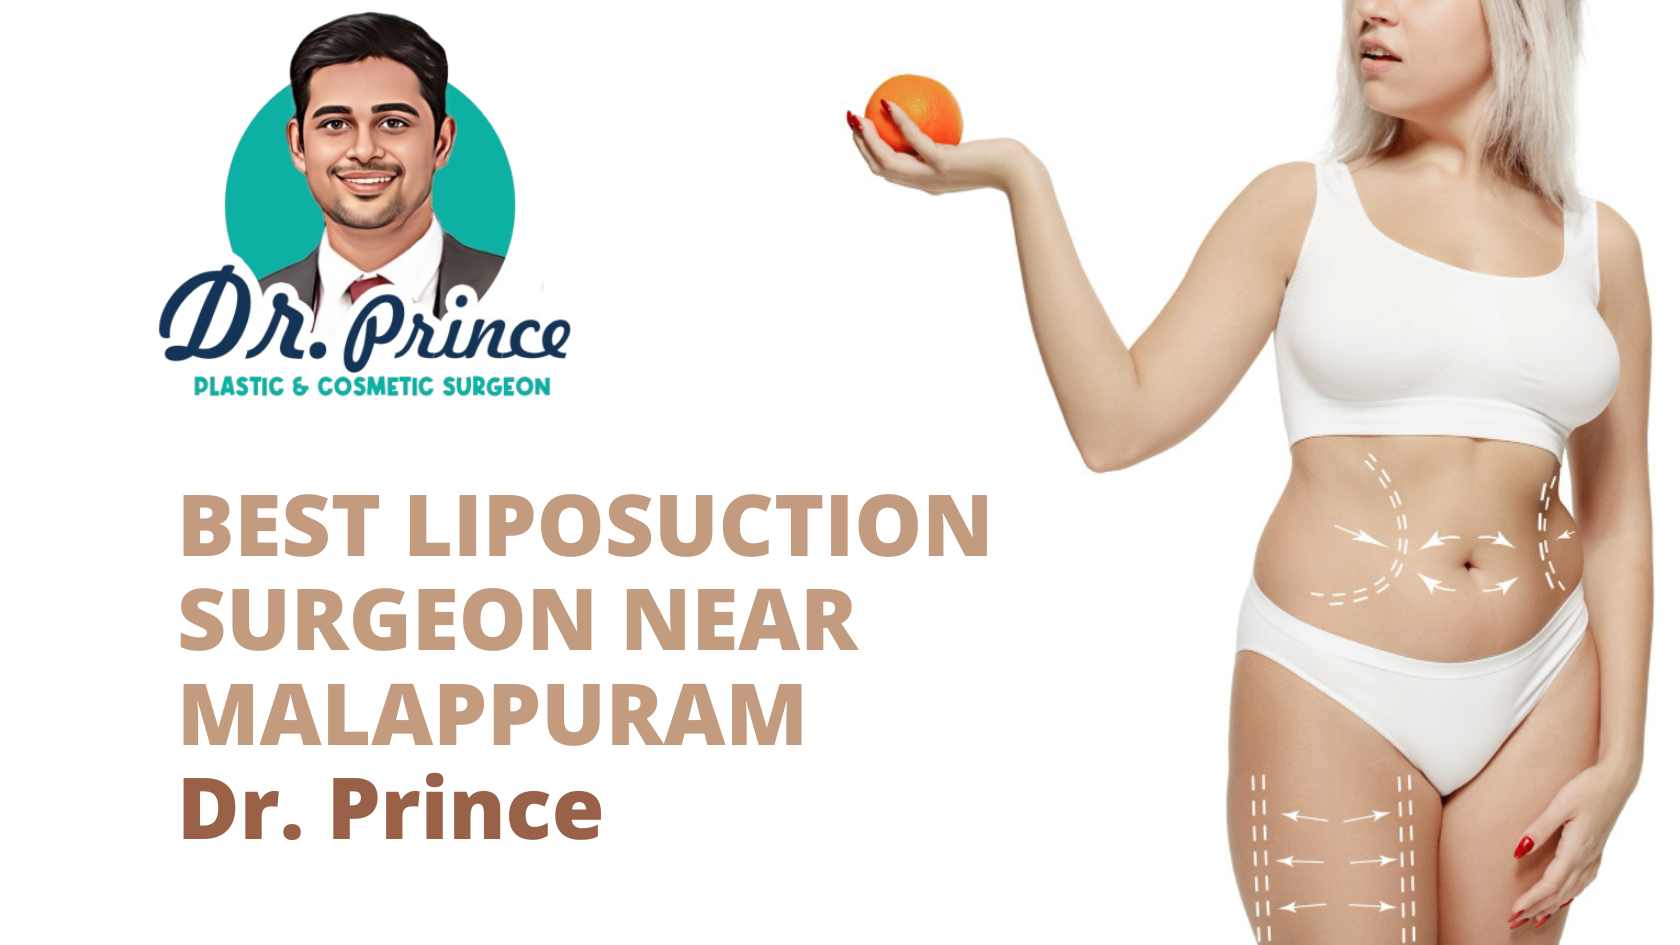 Dr. Prince performing liposuction surgery on a patient near Malappuram